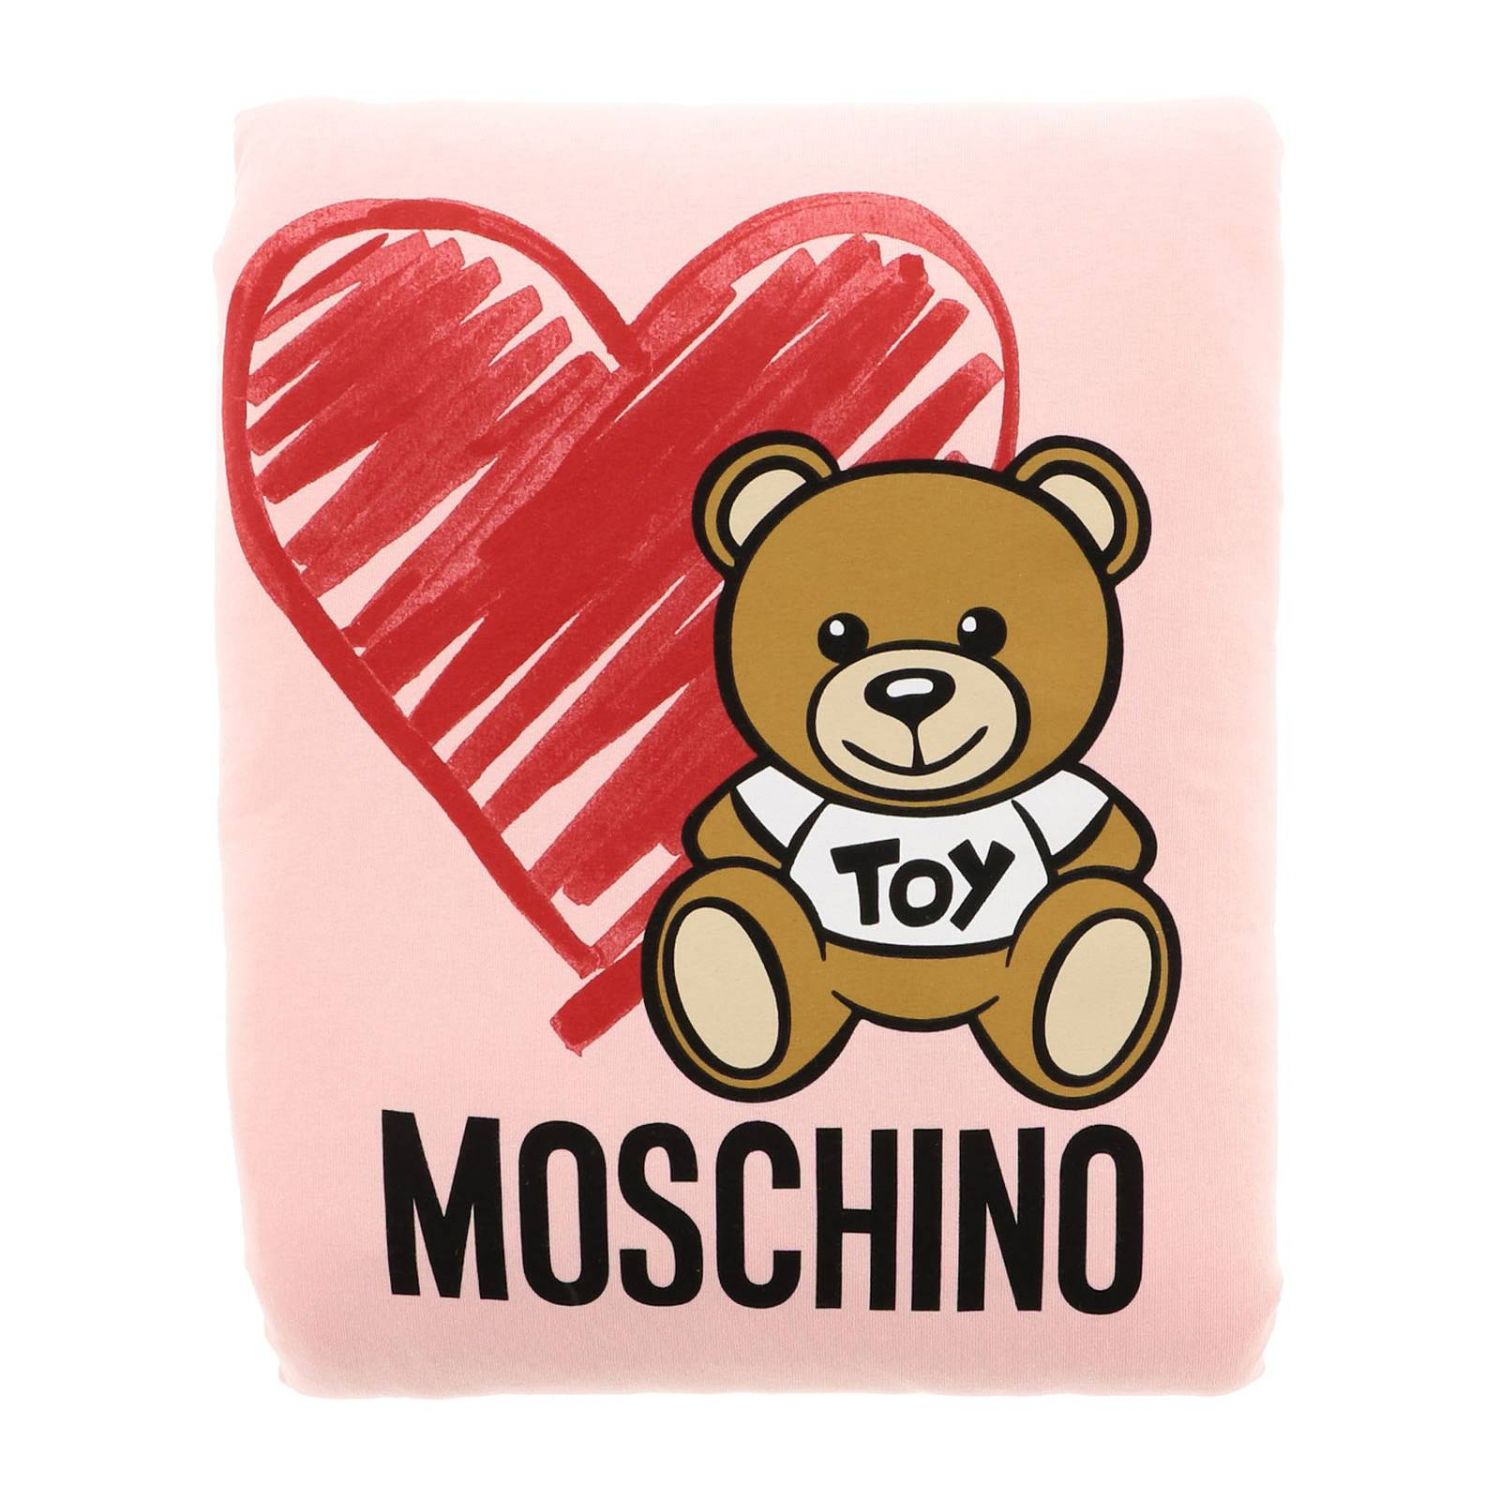 Moschino Baby Outlet: blanket for kids - Pink | Moschino Baby blanket ...